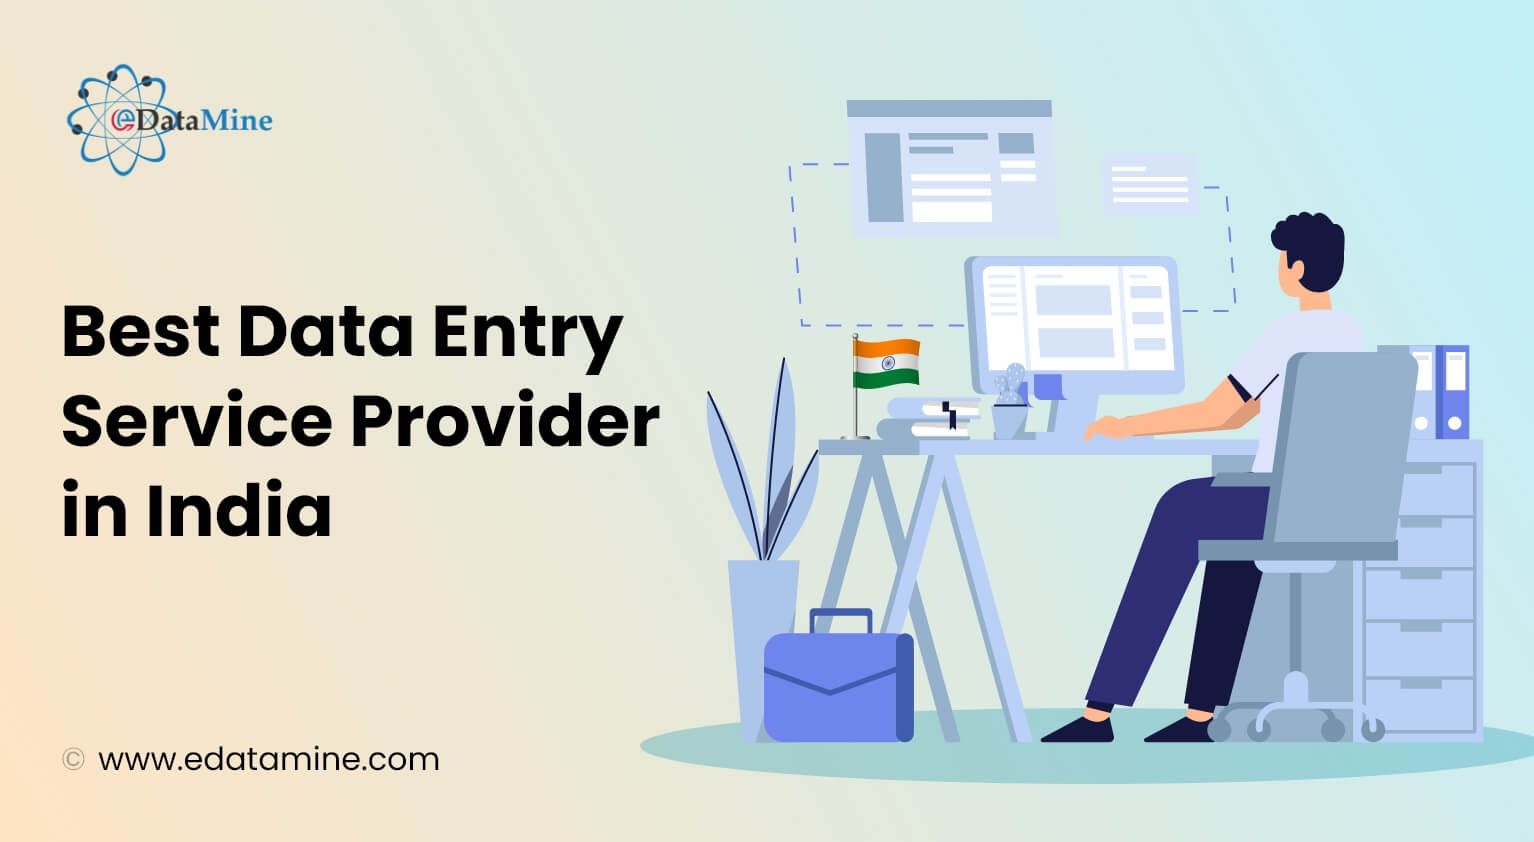 Best Data Entry Service Provider in India